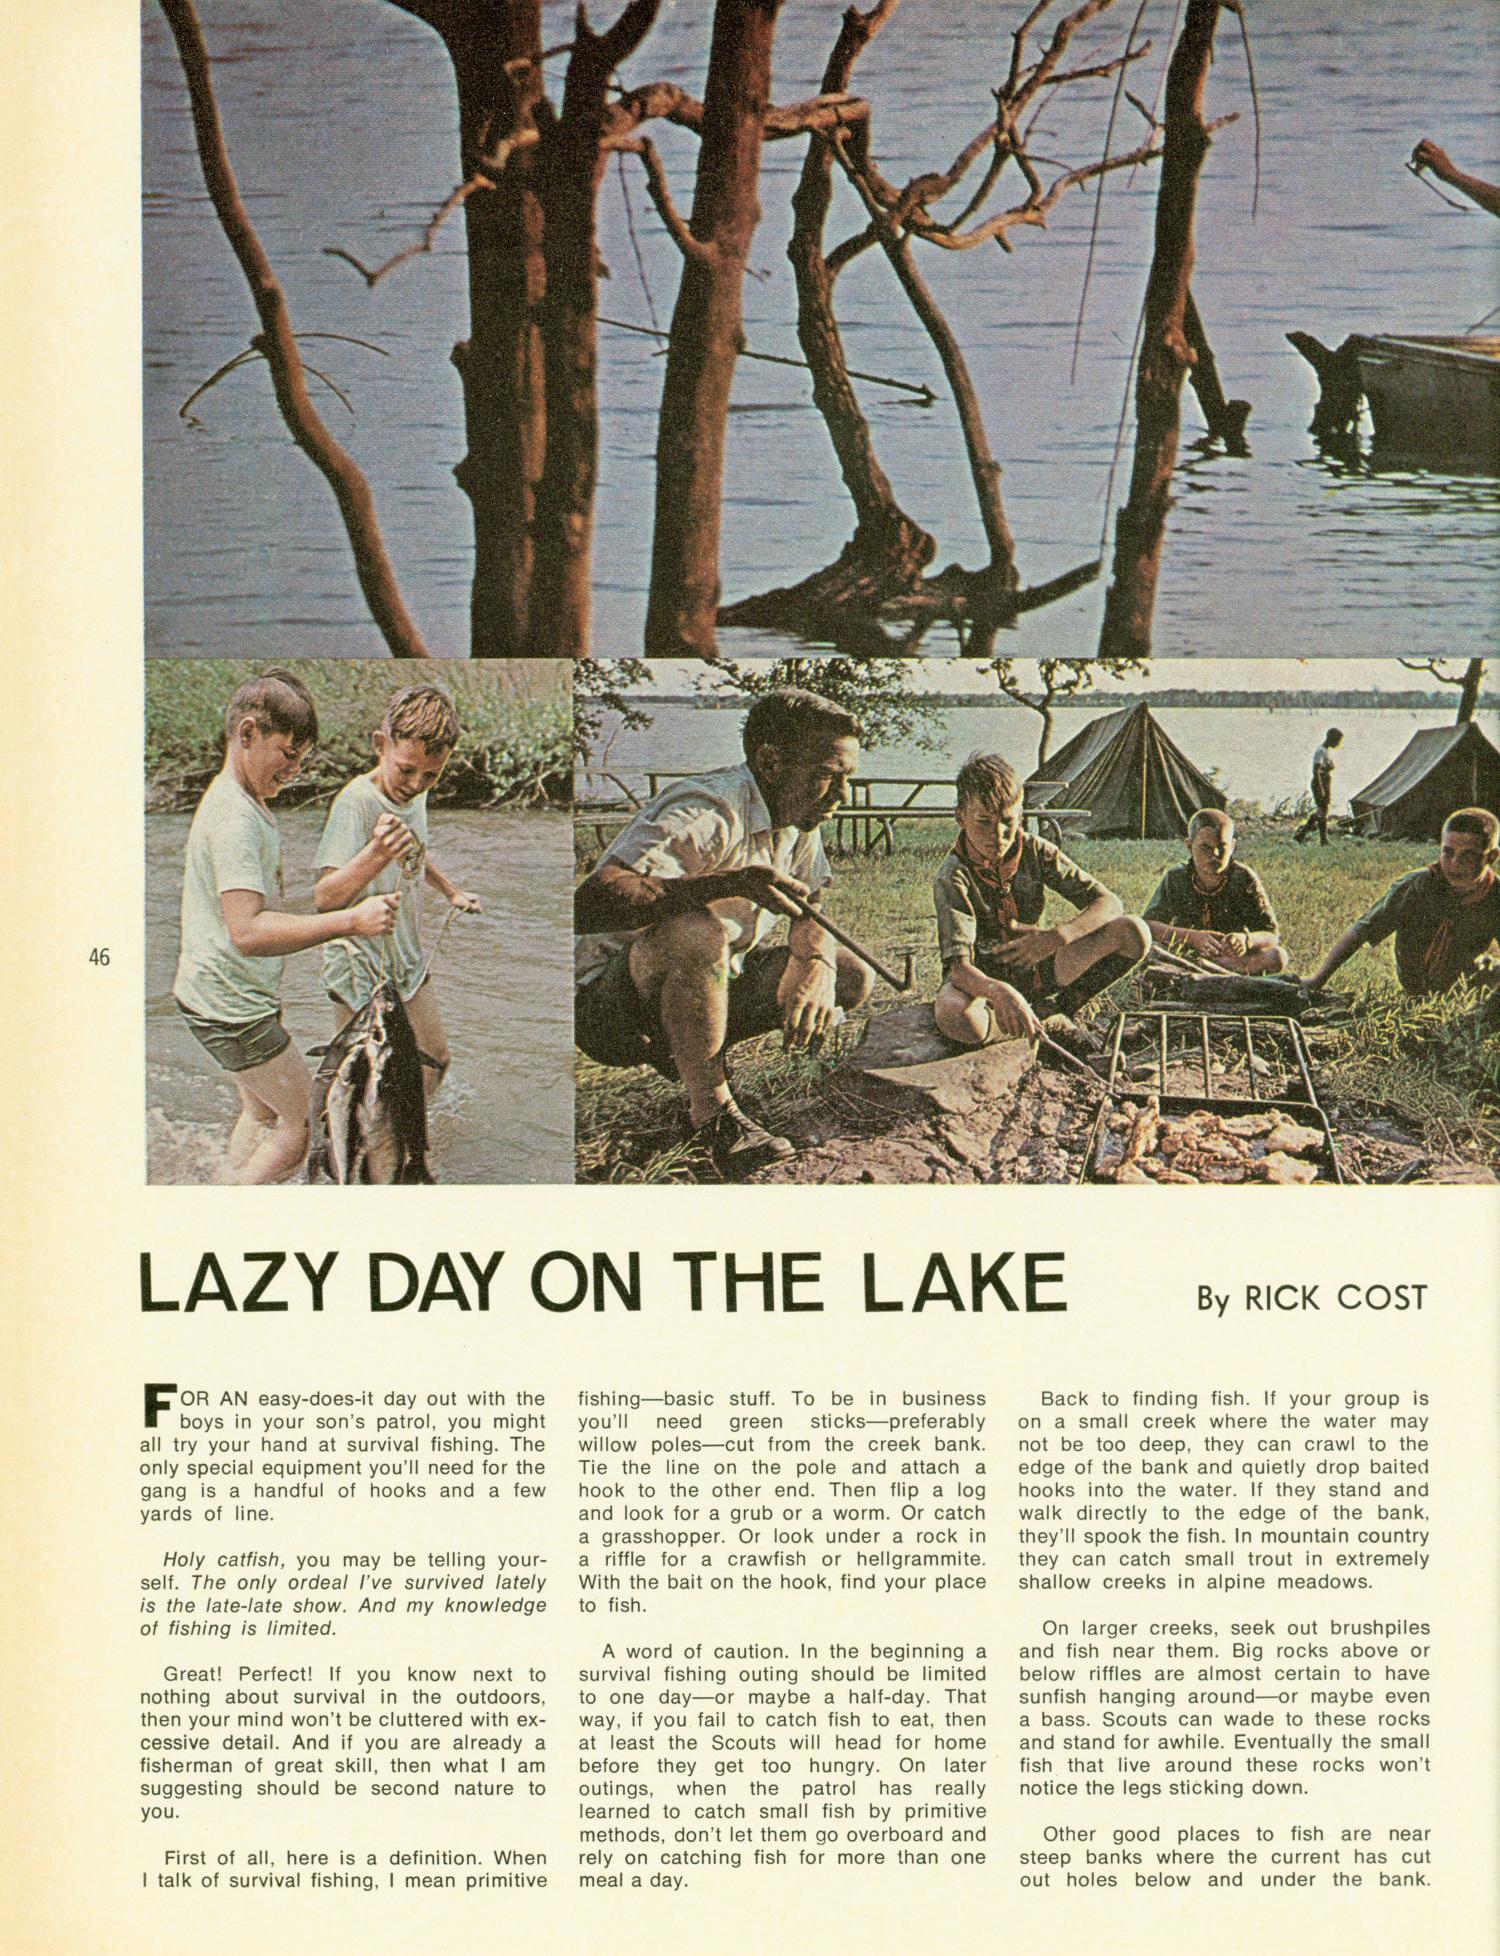 Scouting, Volume 59, Number 2, March-April 1971
                                                
                                                    46
                                                